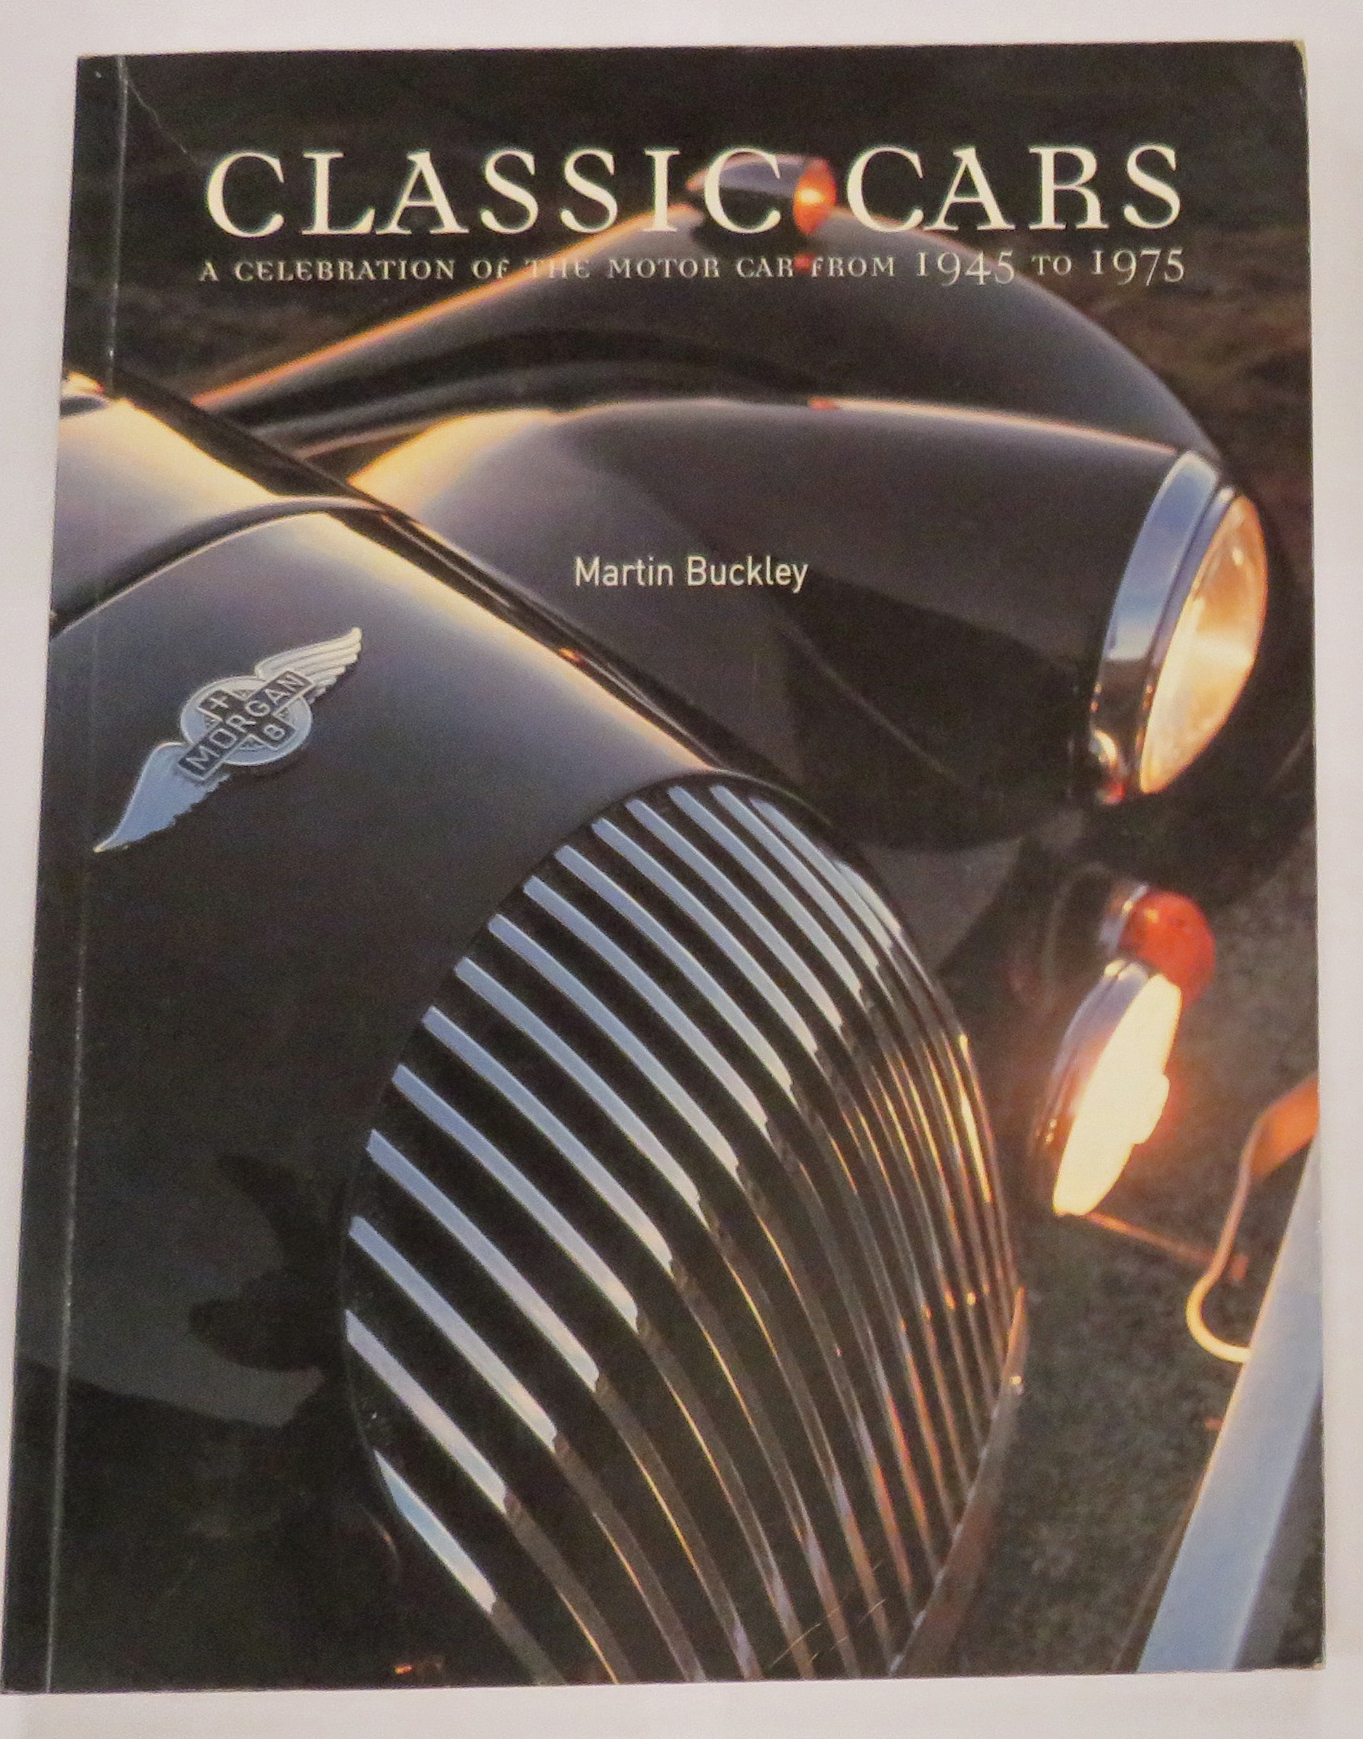 Classic Cars A Celebration Of The Motor Car From 1945 to 1975